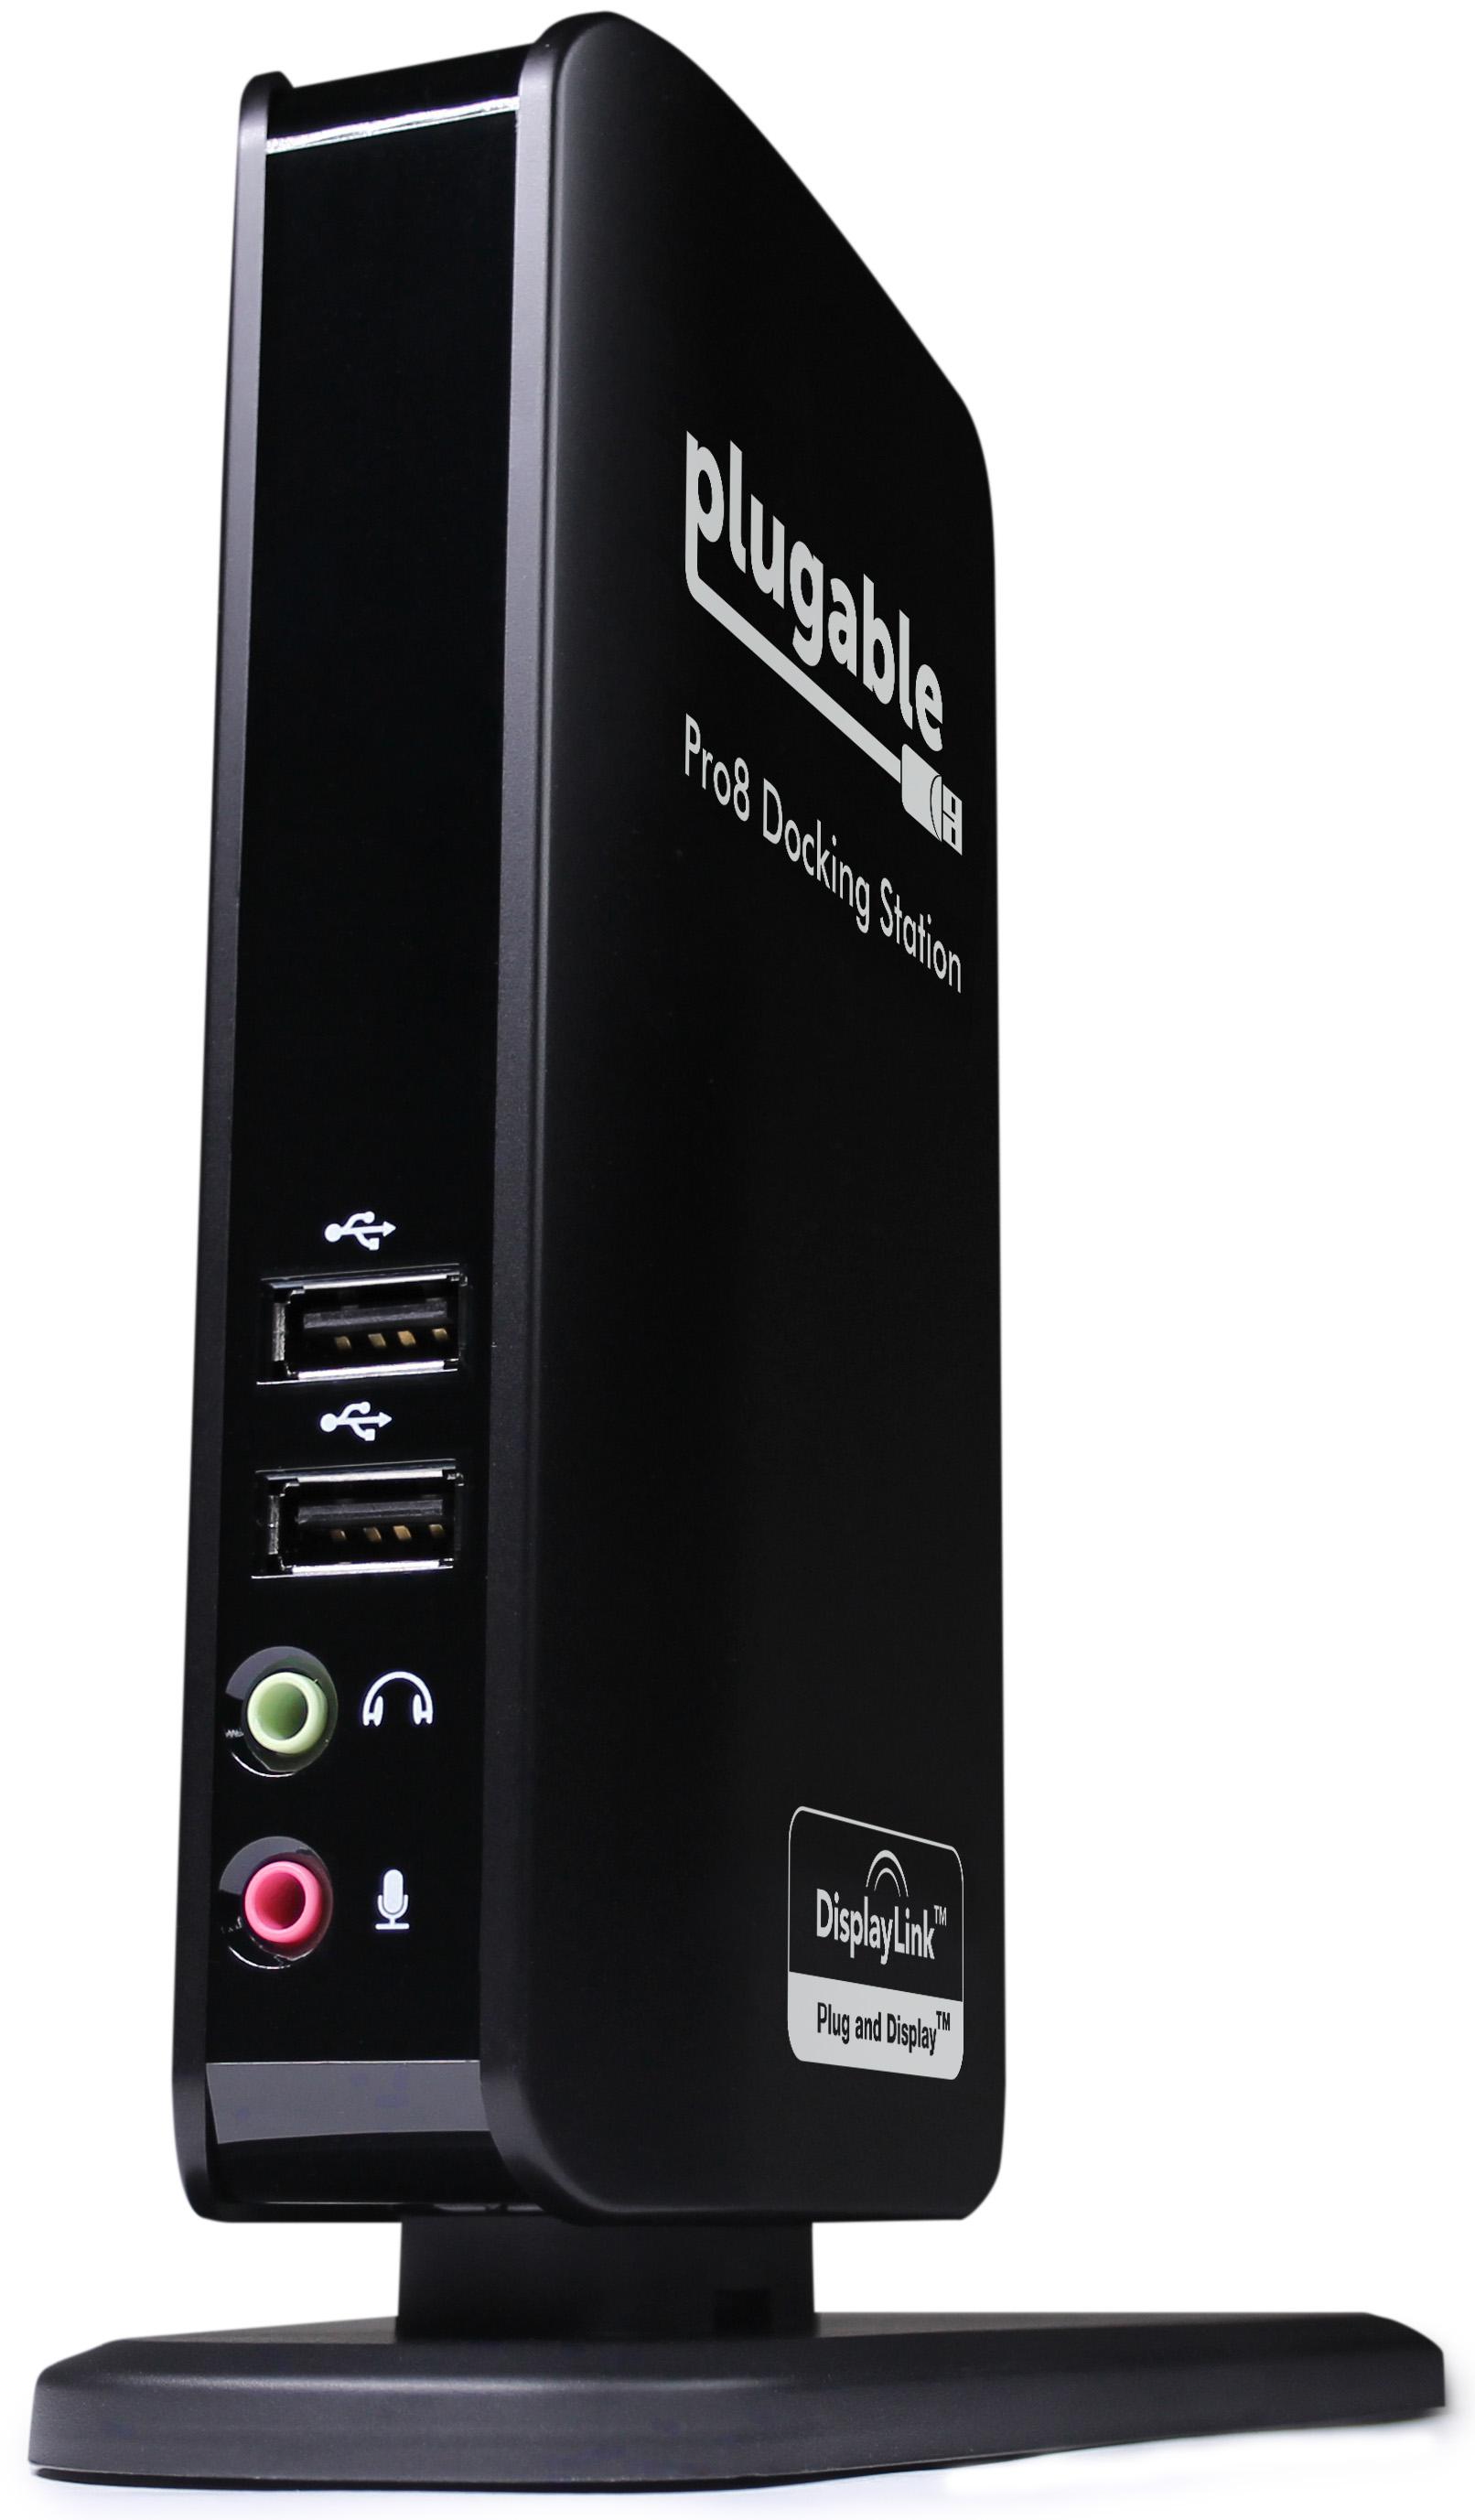 Plugable Pro8 Charging & USB Docking Station for Select Windows Tablets - Simultaneously Charges & Adds Extended Display Output, 3.5mm Audio In/Out, 10/100 Ethernet, and 4 2.0 USB Ports. - image 1 of 7